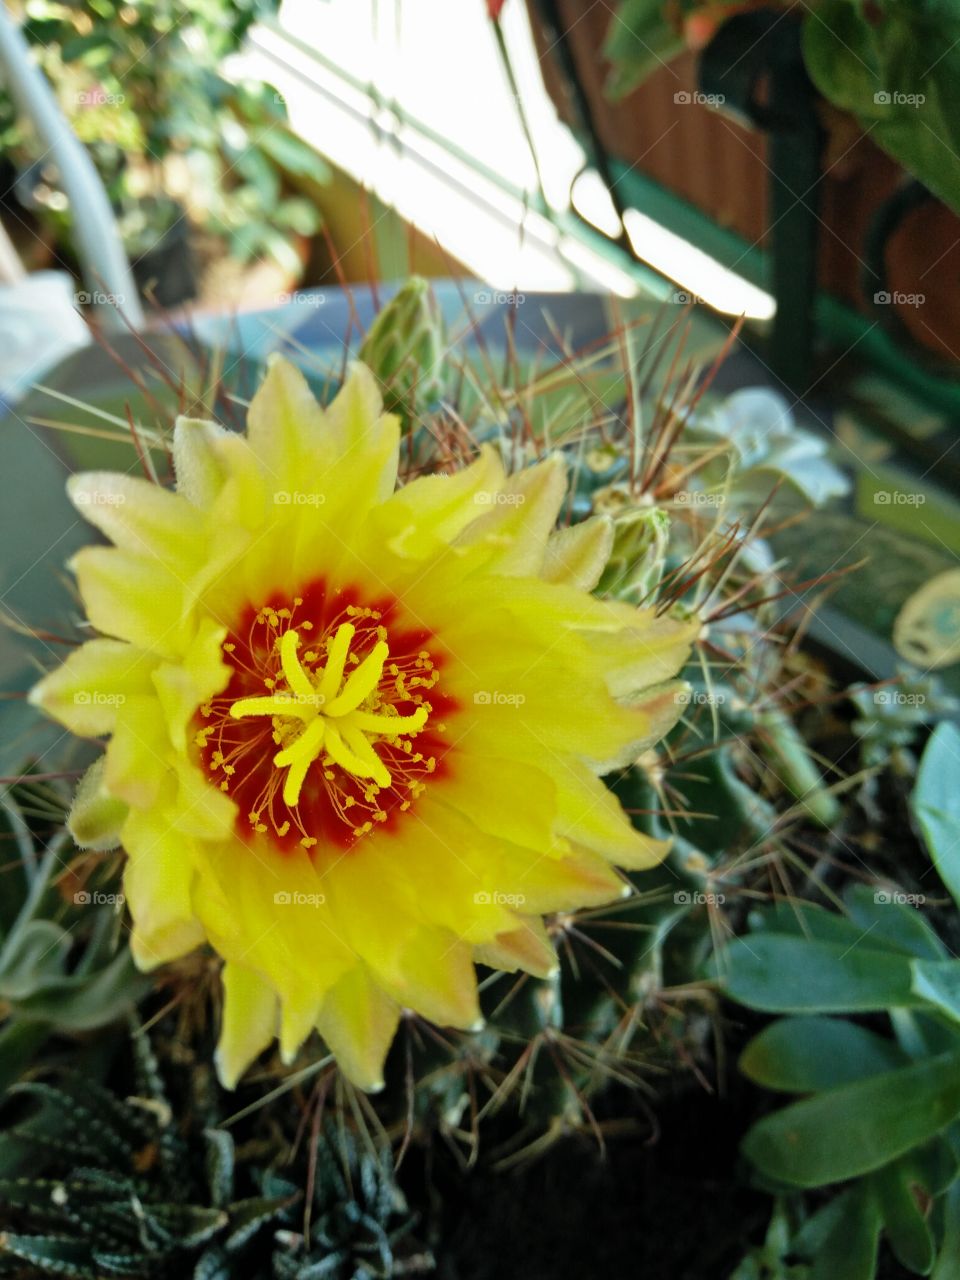 a closeup view of an amazing and colorful yellow cactus flower in a garden